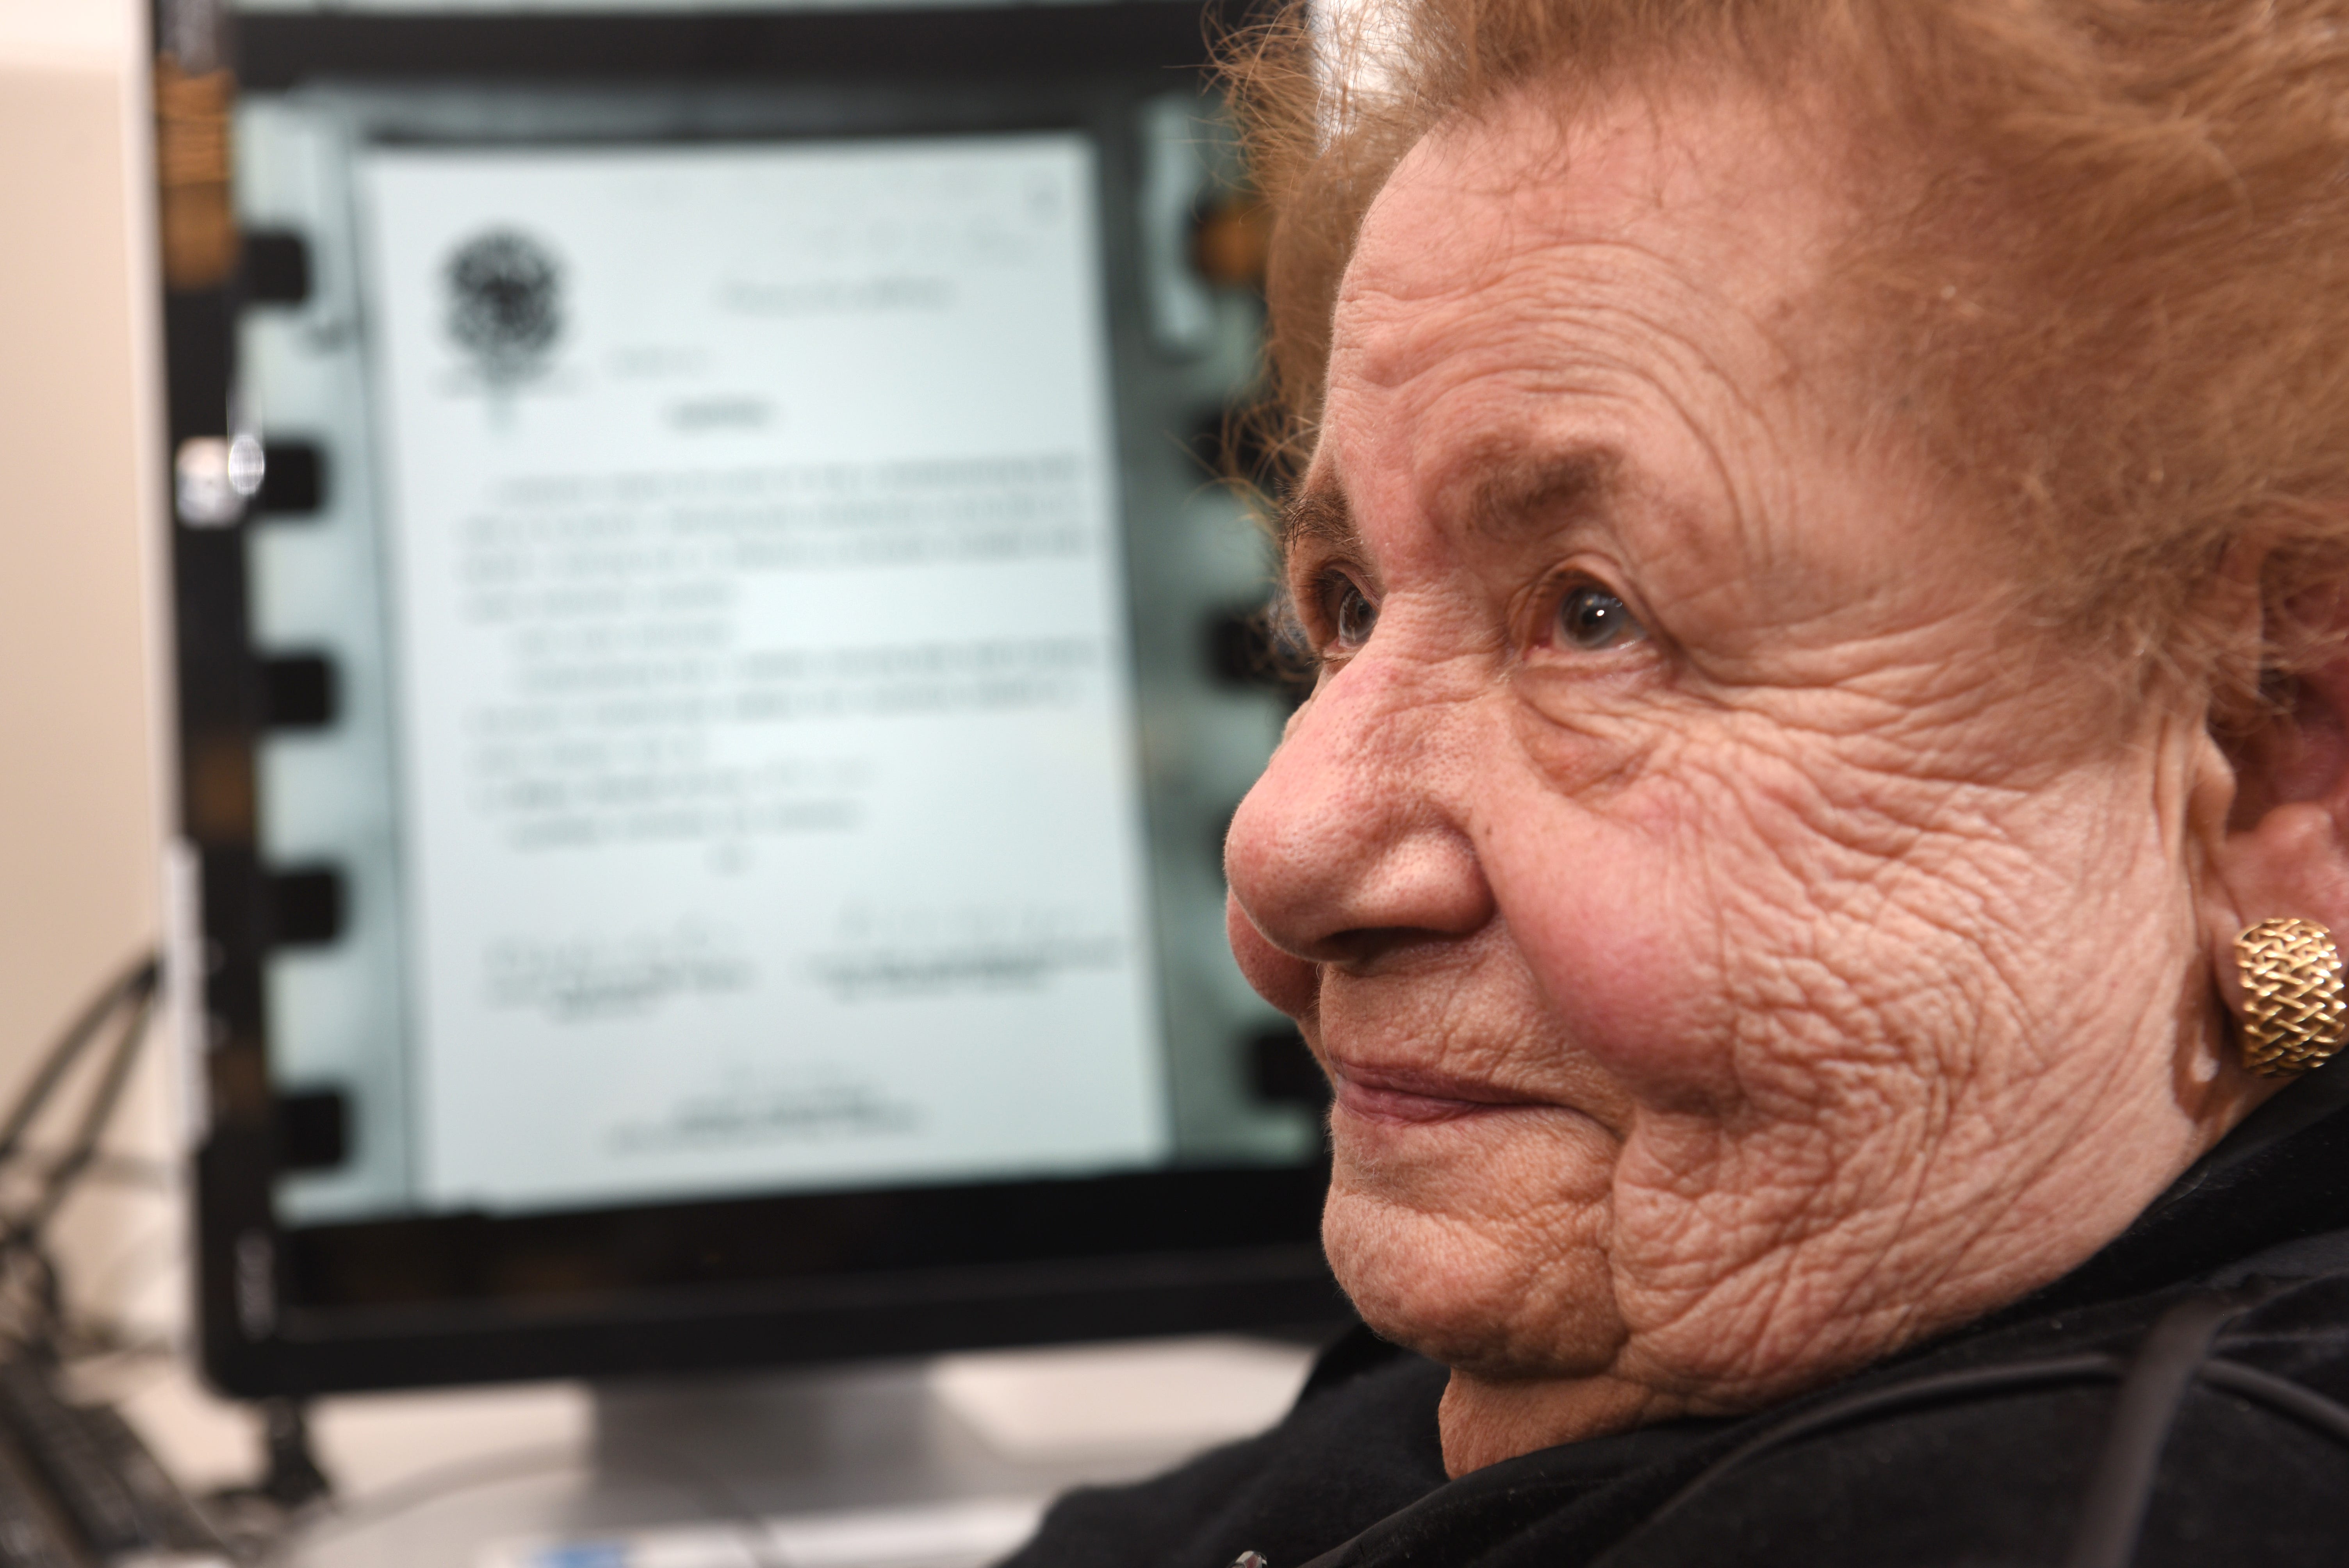 Clara Garbon-Rednoti, a Holocaust survivor, examines and reads documents on micro-film in the library of the Holocaust Memorial Museum in Farmington Hills.